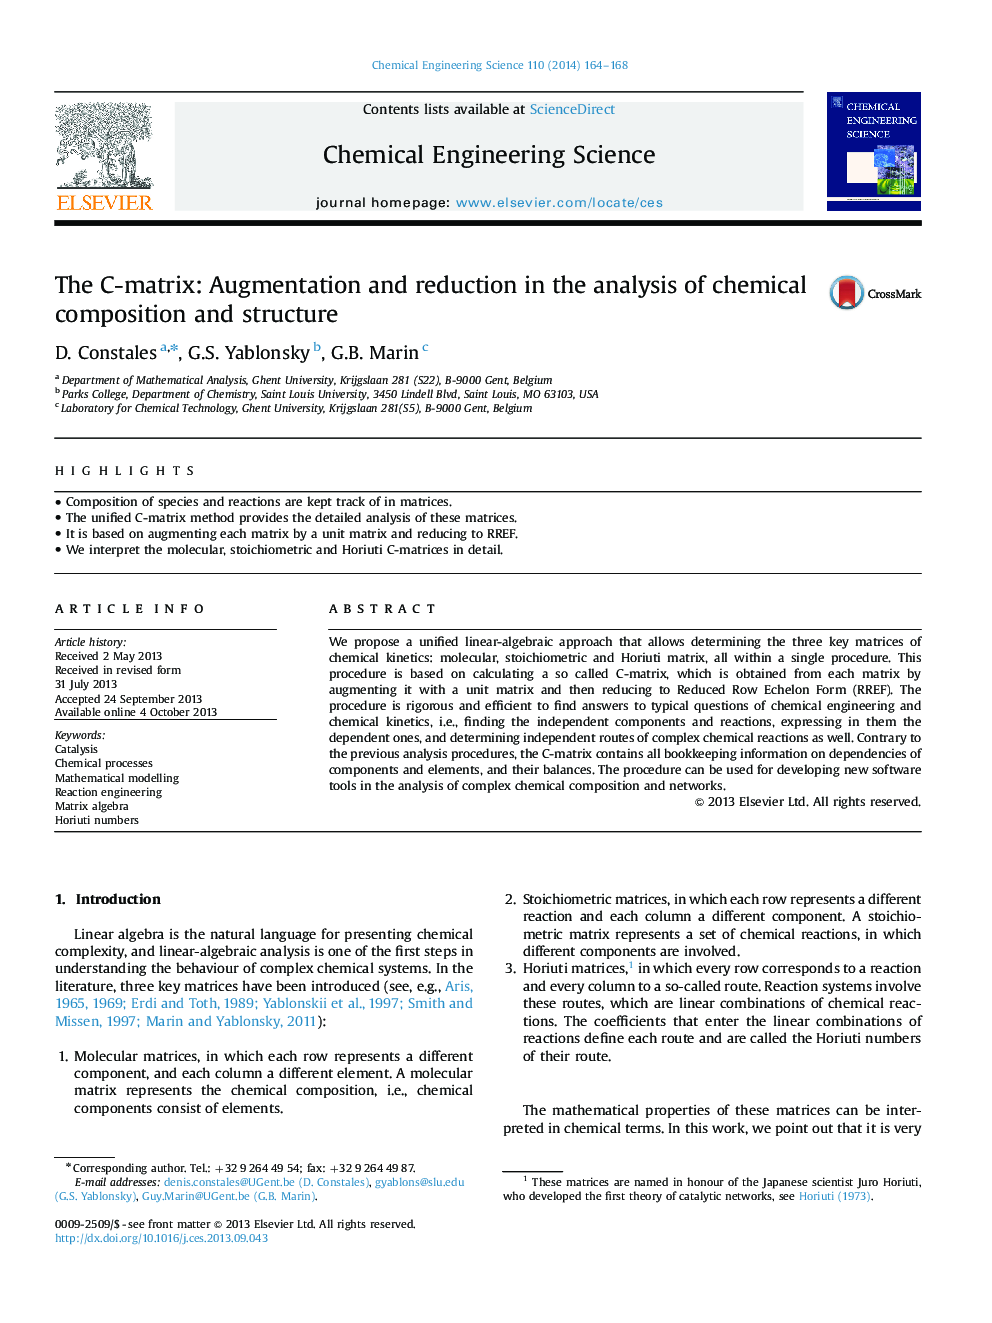 The C-matrix: Augmentation and reduction in the analysis of chemical composition and structure